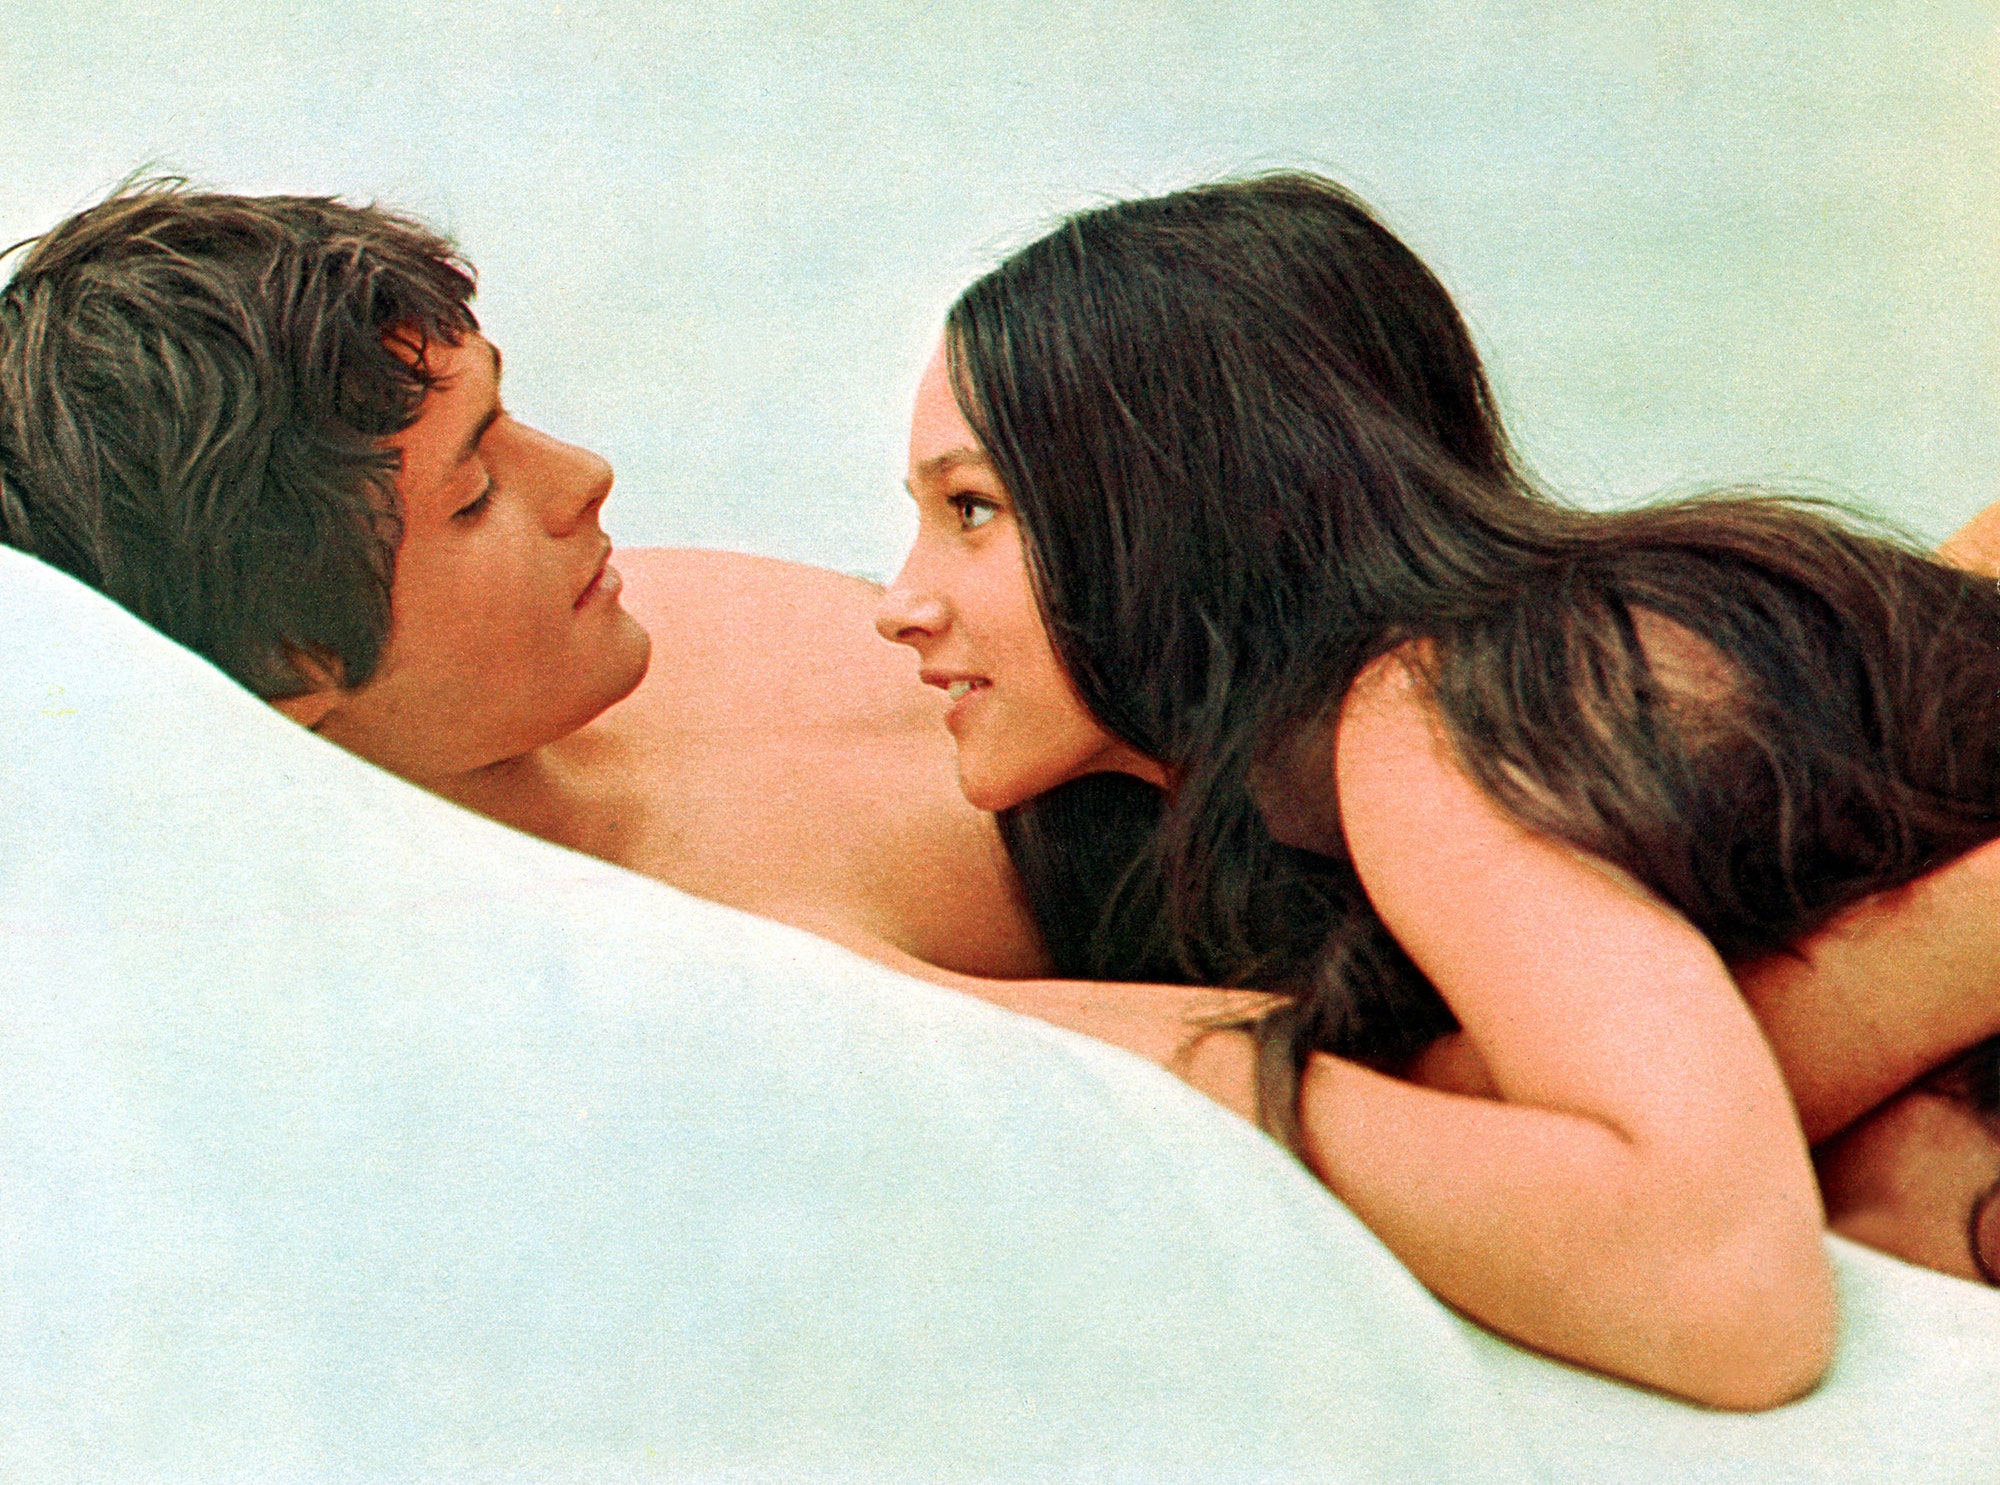 belinda beer recommends olivia hussey romeo and juliet topless pic